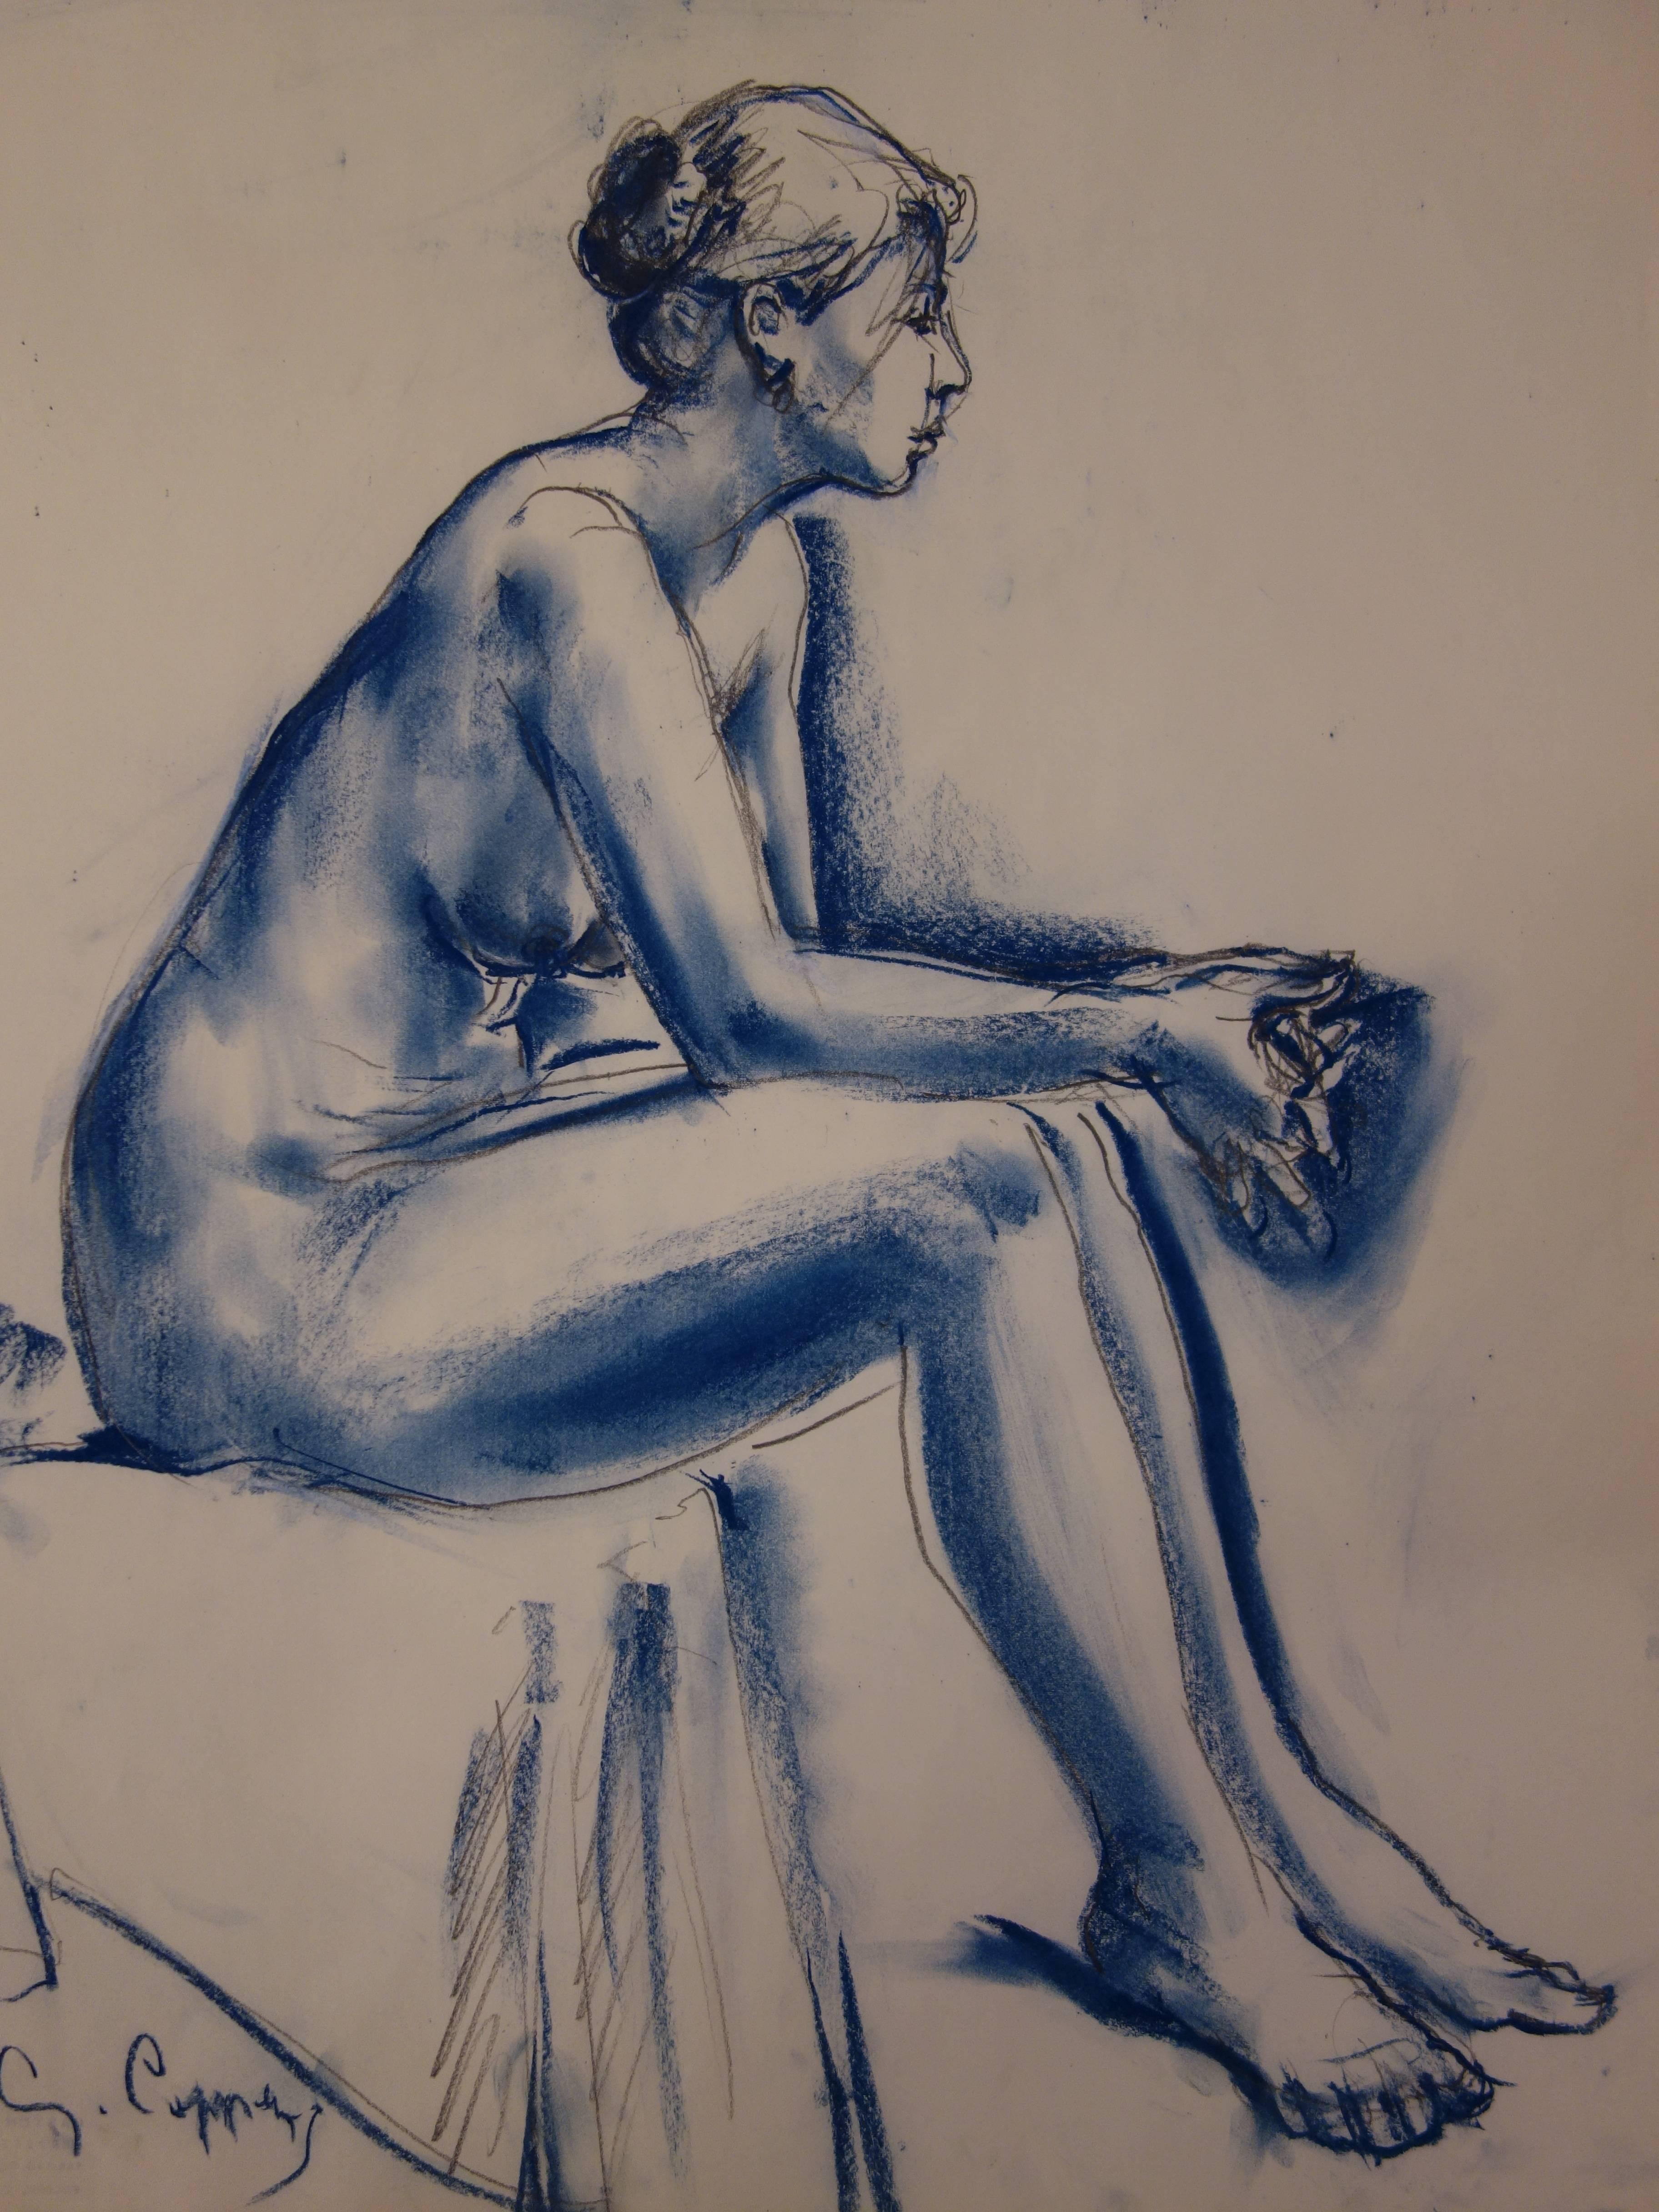 Gaston COPPENS (1909 - 2002)
Blue Nude Ballerina 

Original pencil and charcoal drawing
Signed in the bottom left
Stamp of the artist on the back
On drawing paper 52 x 43 cm (c 21 x 17 inch)

Excellent condition

Gaston Coppens studied sculpture in